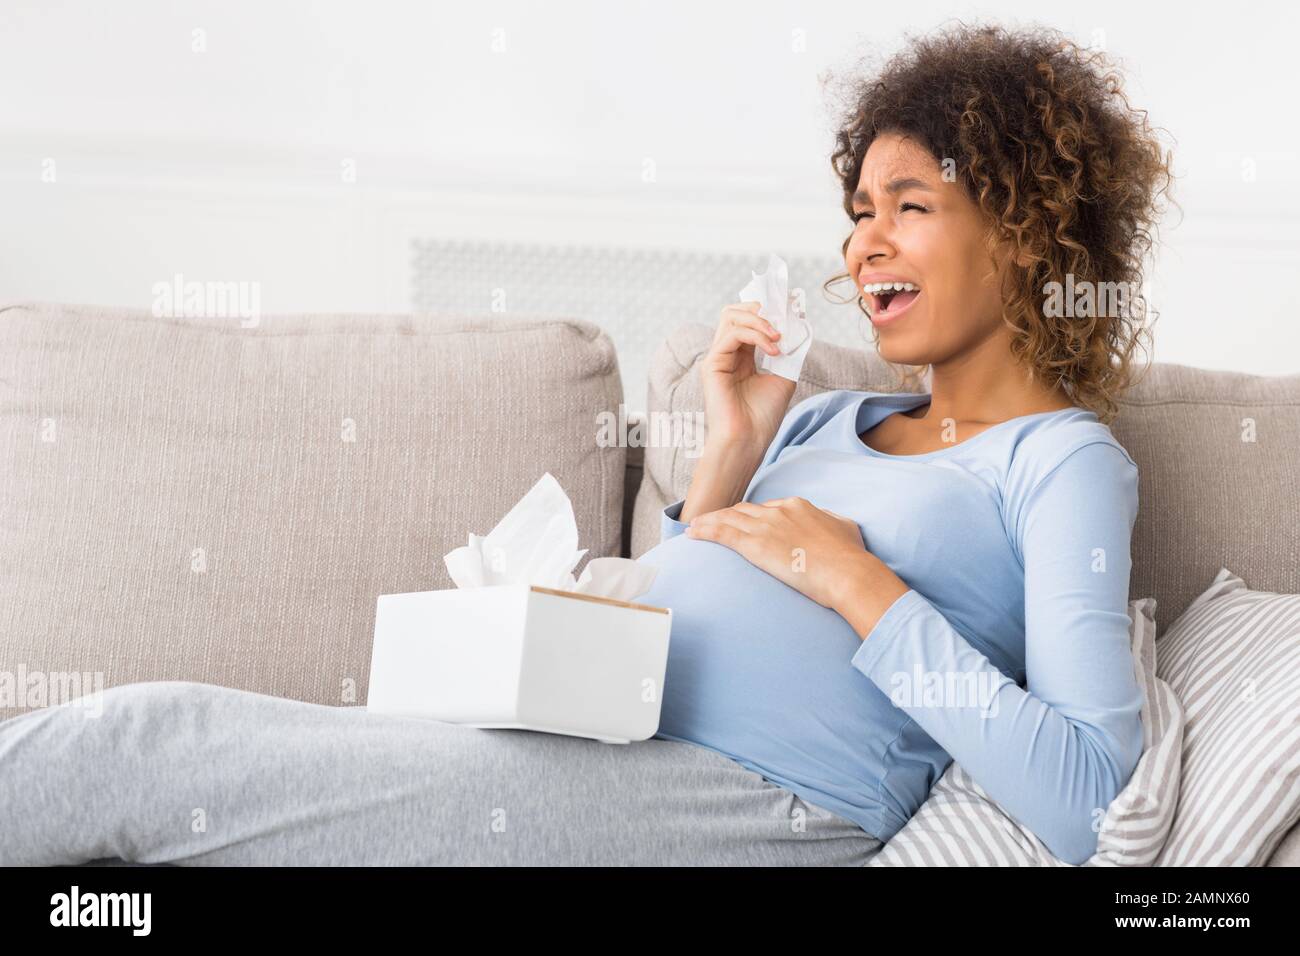 Depression and pregnancy. Expectant woman crying, sitting on sofa Stock Photo